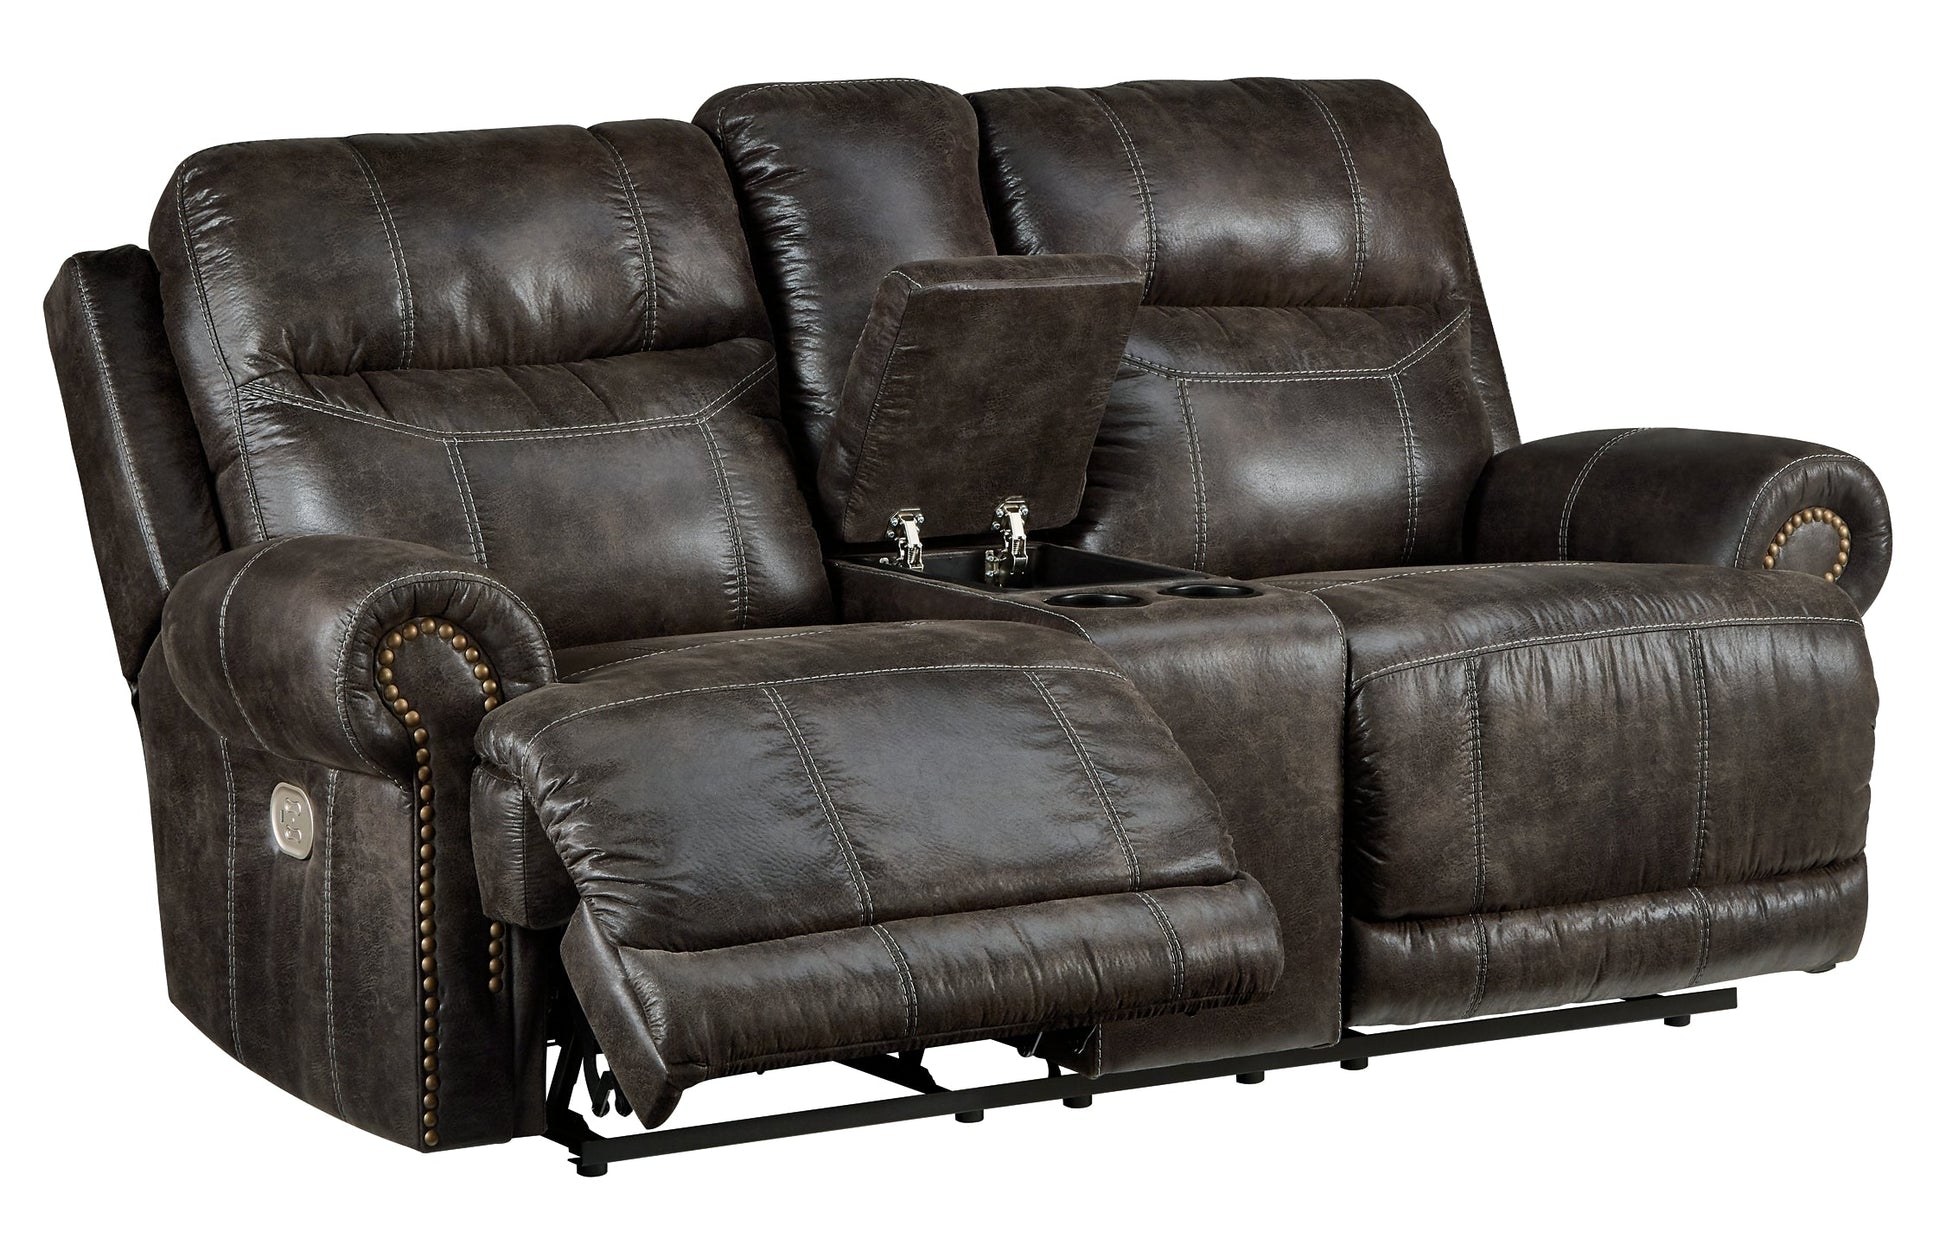 Grearview Sofa and Loveseat at Cloud 9 Mattress & Furniture furniture, home furnishing, home decor